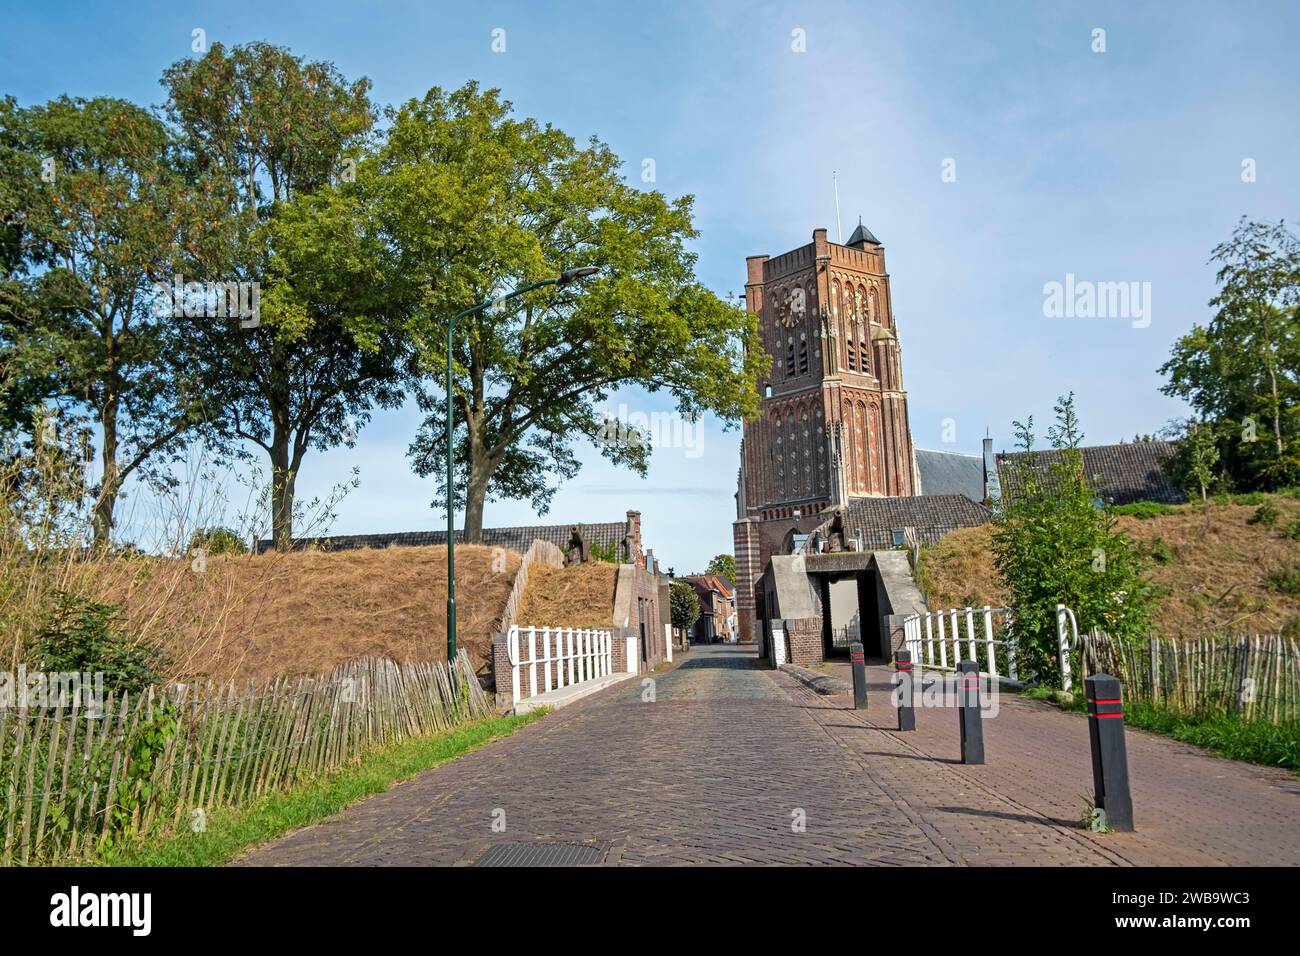 Medieval tower from the St. Marin's church in the fortified city Woudrichem in the Netherlands Stock Photo